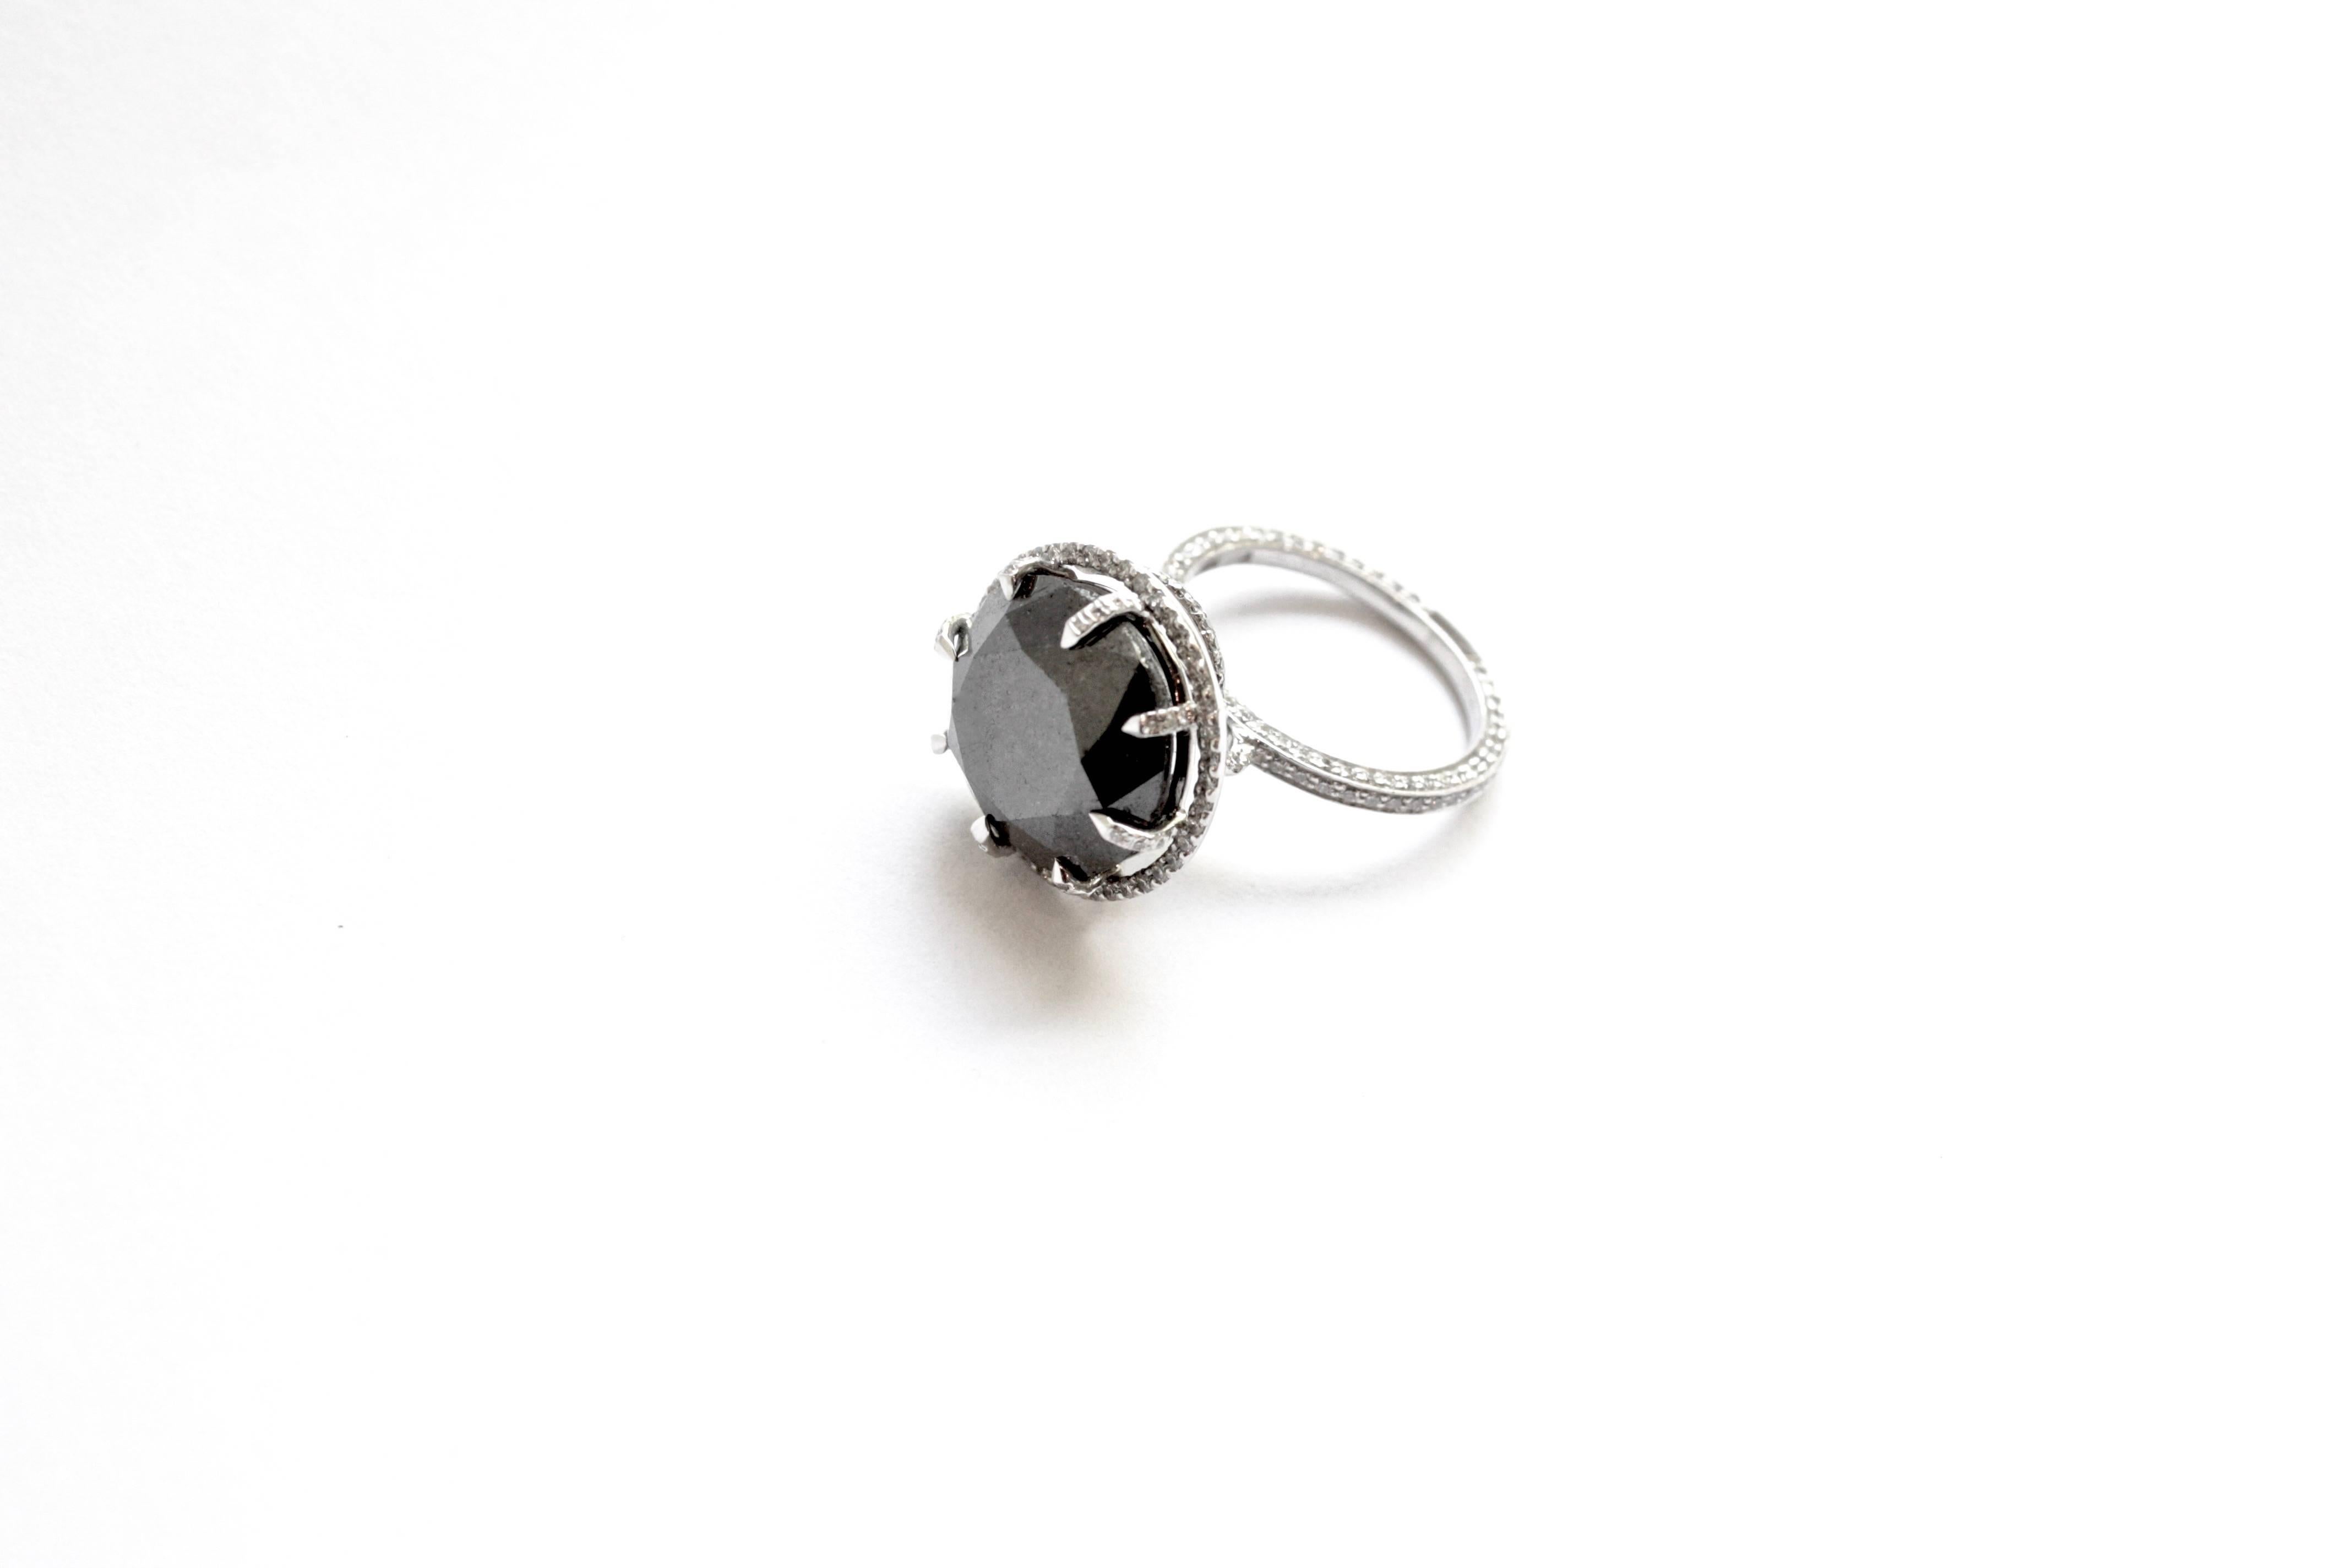 Moosh Ring
A platinum ring showcasing a 14.60 carat natural round black diamond, completely set in white diamonds.  The center stone is encircled in diamonds, which then trail and twist along the side to meet the three-sided white diamond encrusted